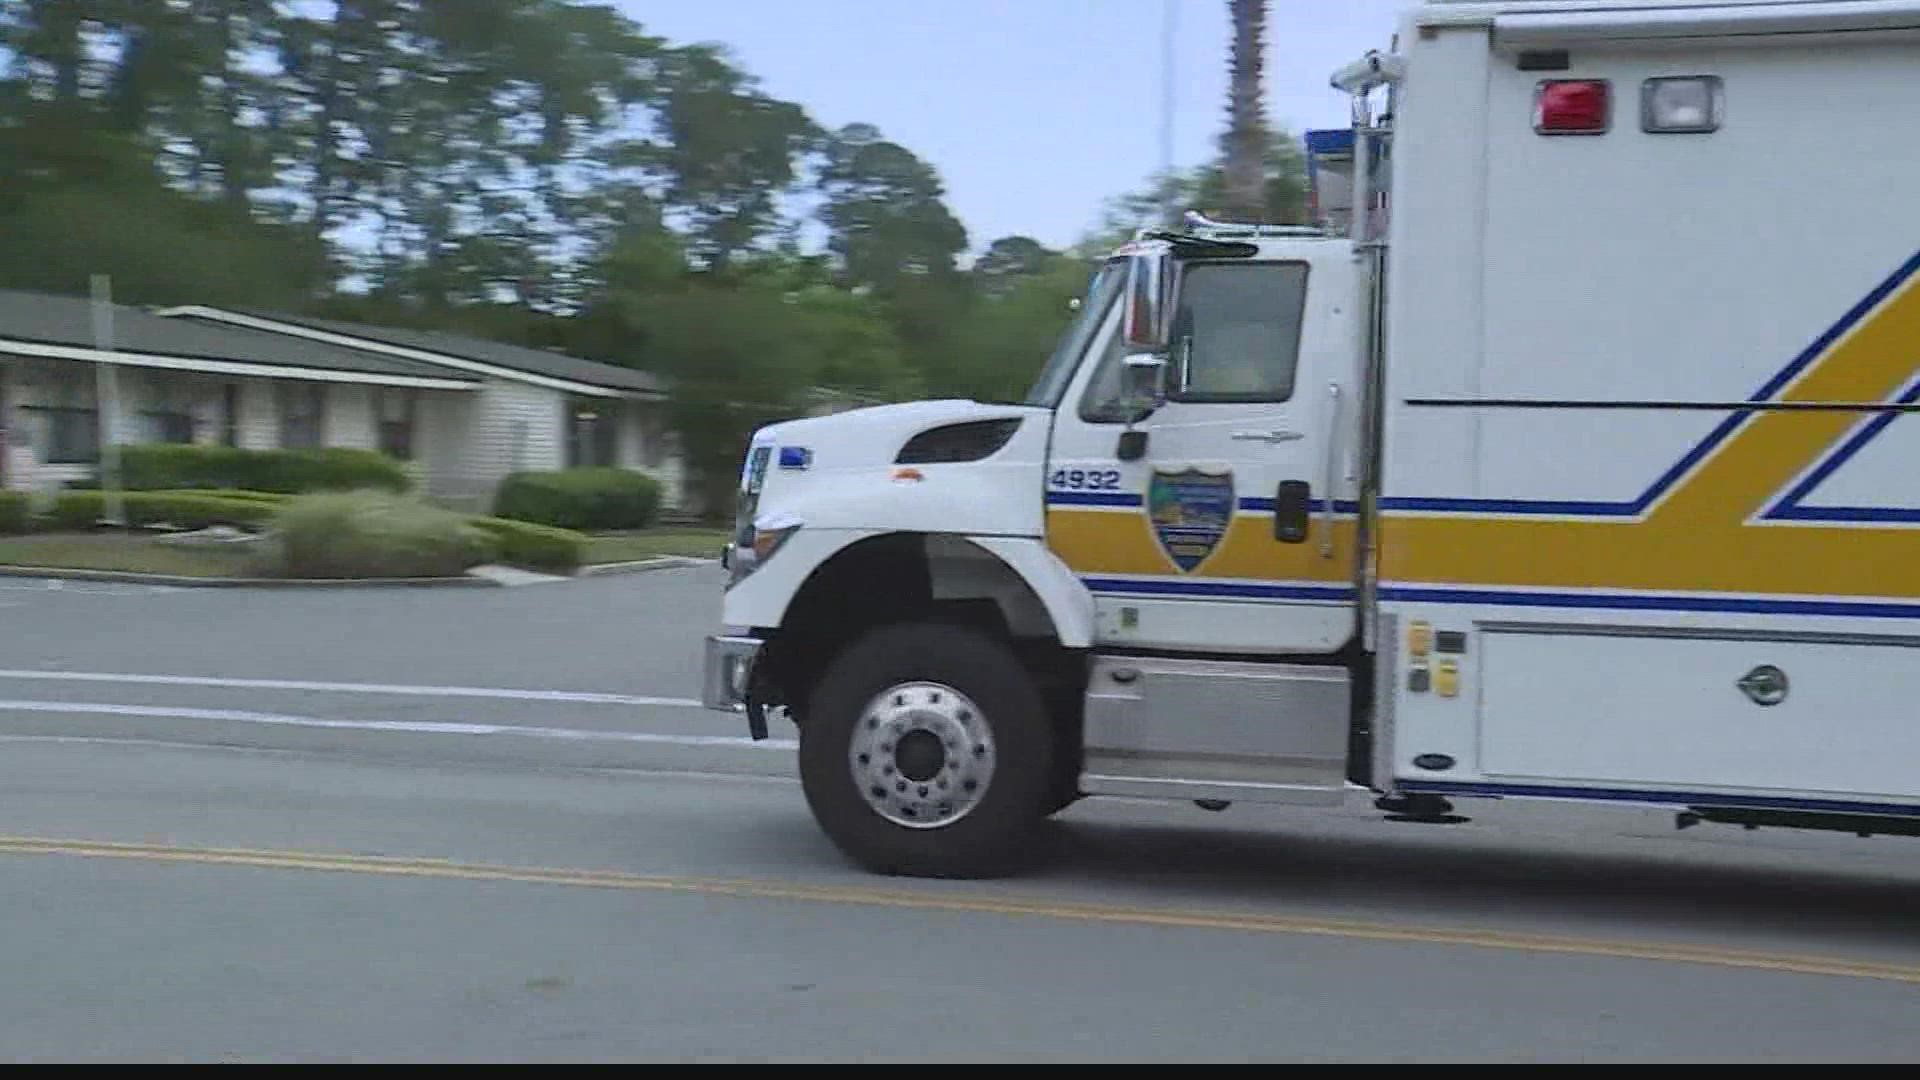 First Coast News first learned about the standoff from viewers around 3:30 in the afternoon.